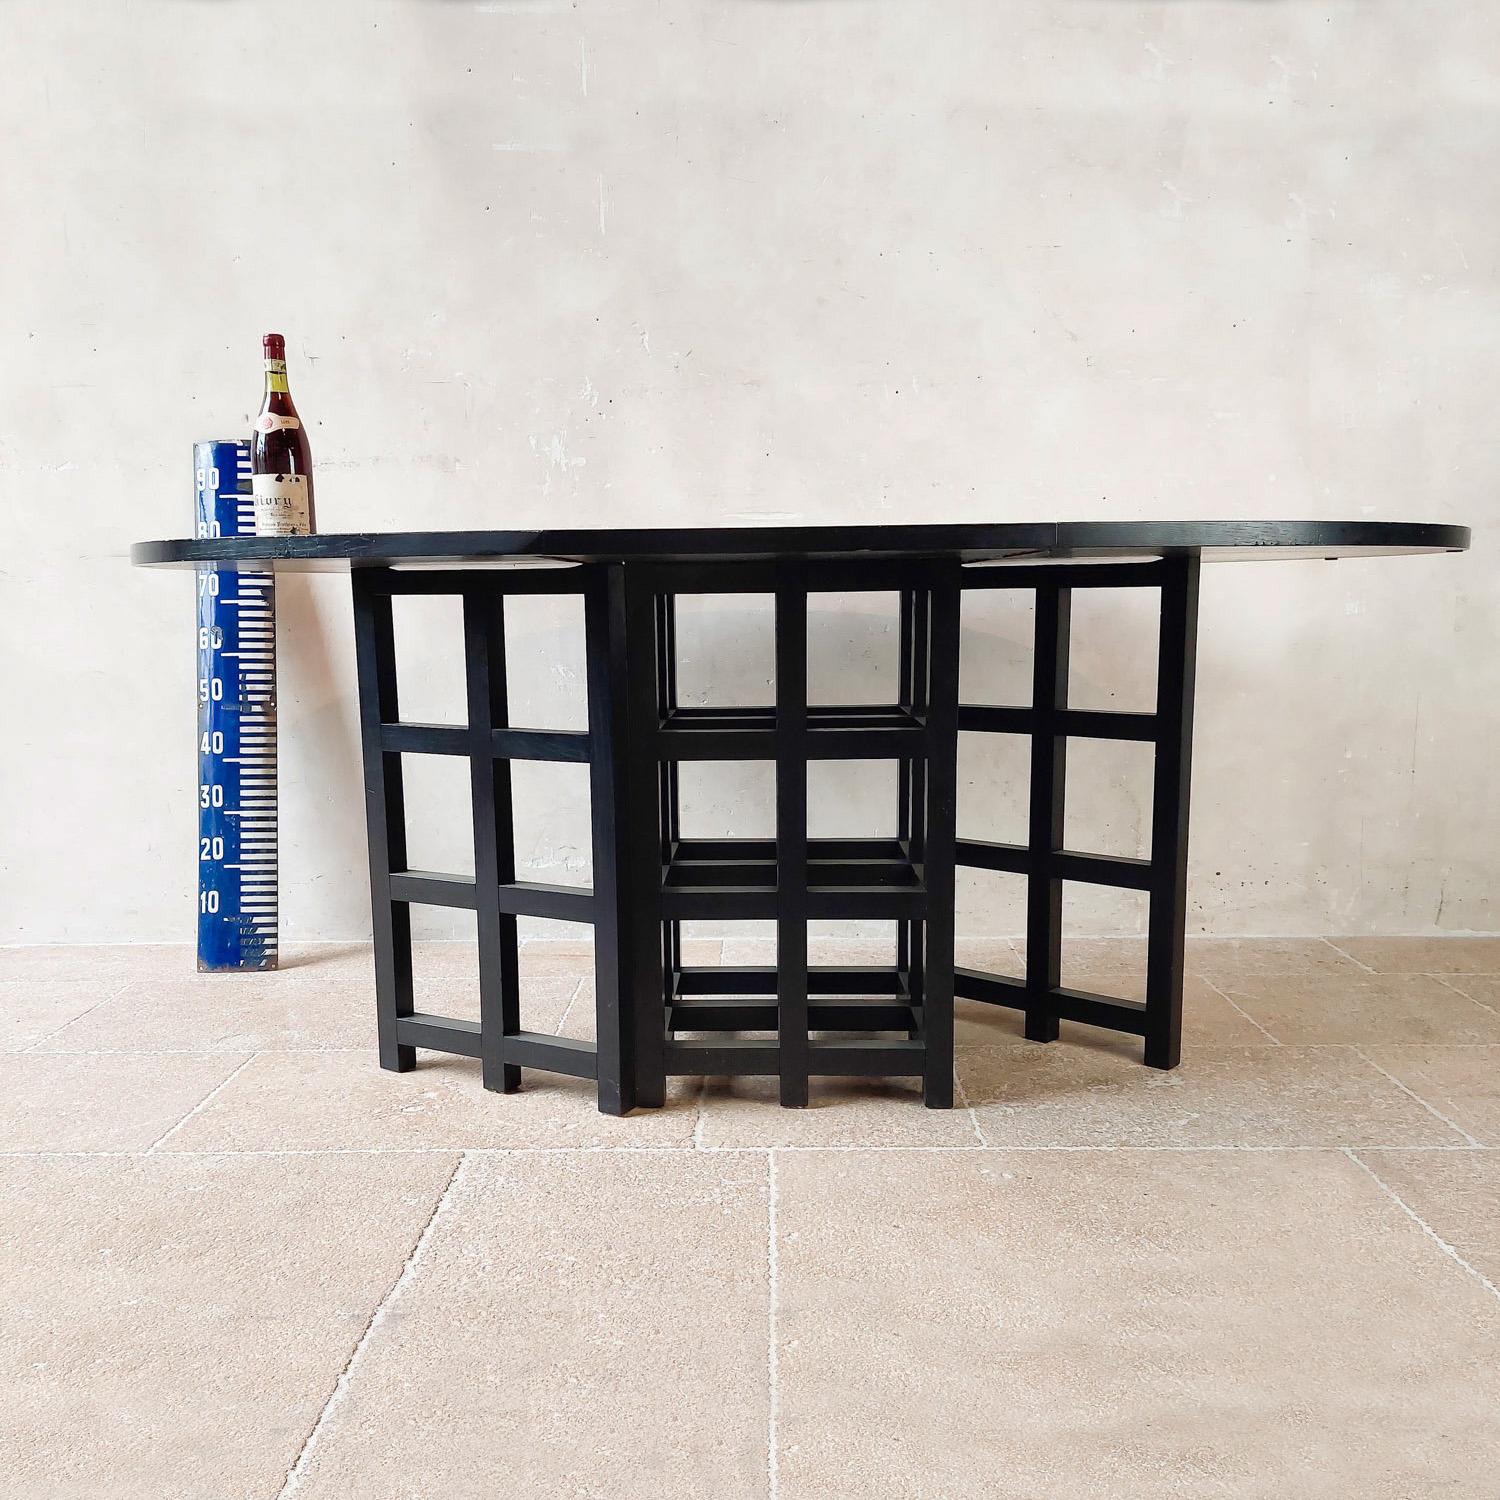 Elegant dining set, designed by Charles Rennie Mackintosh and expertly manufactured in Italy during the 1970s. This set includes a sophisticated oval dining table and four matching chairs.

The oval table features a sleek black ash finish,